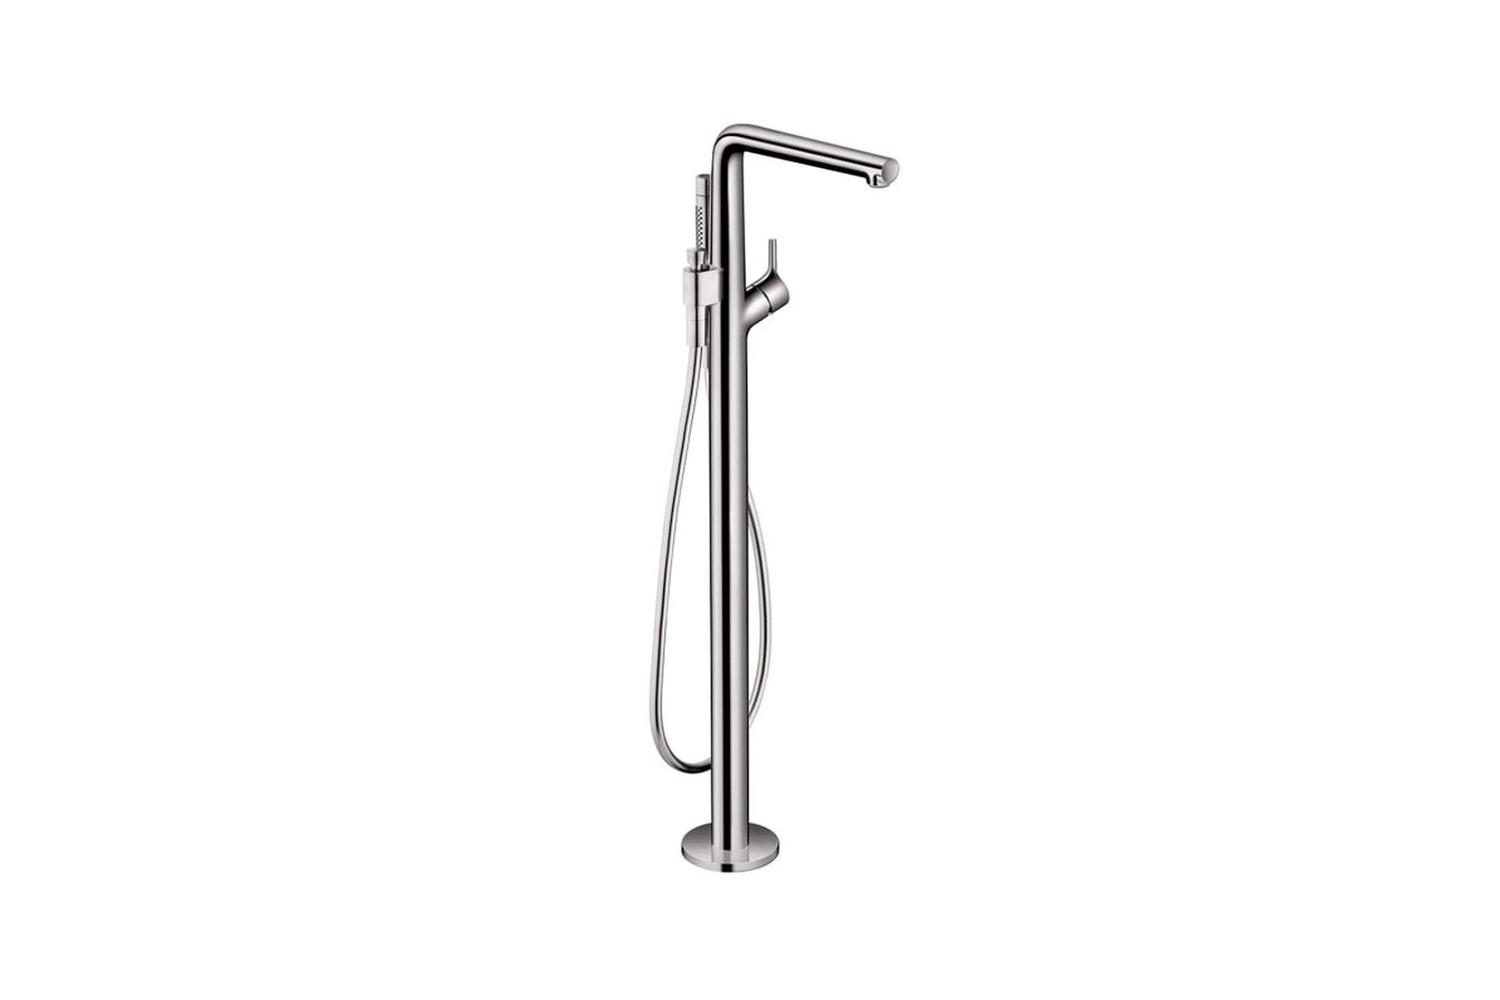 the hansgrohe freestanding bathtub faucet (72413001) is $609.70 on amazon. 11